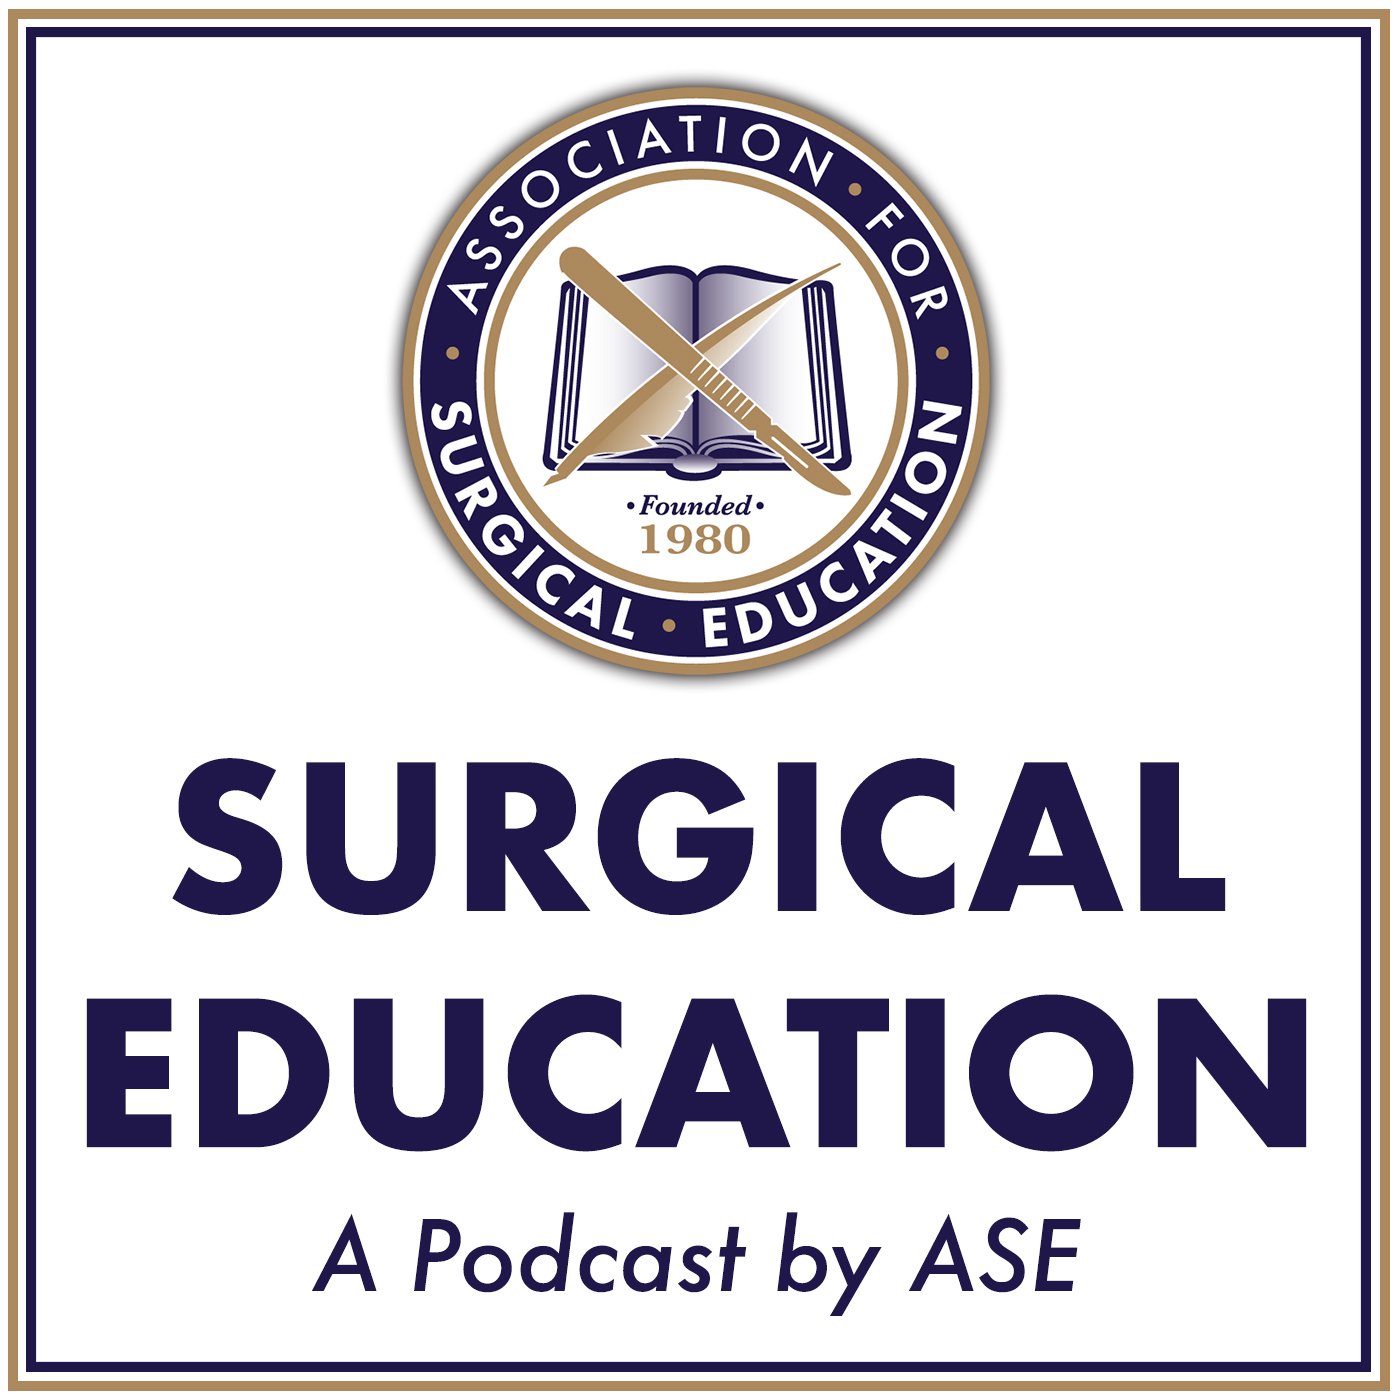 The Association for Surgical Education Podcast